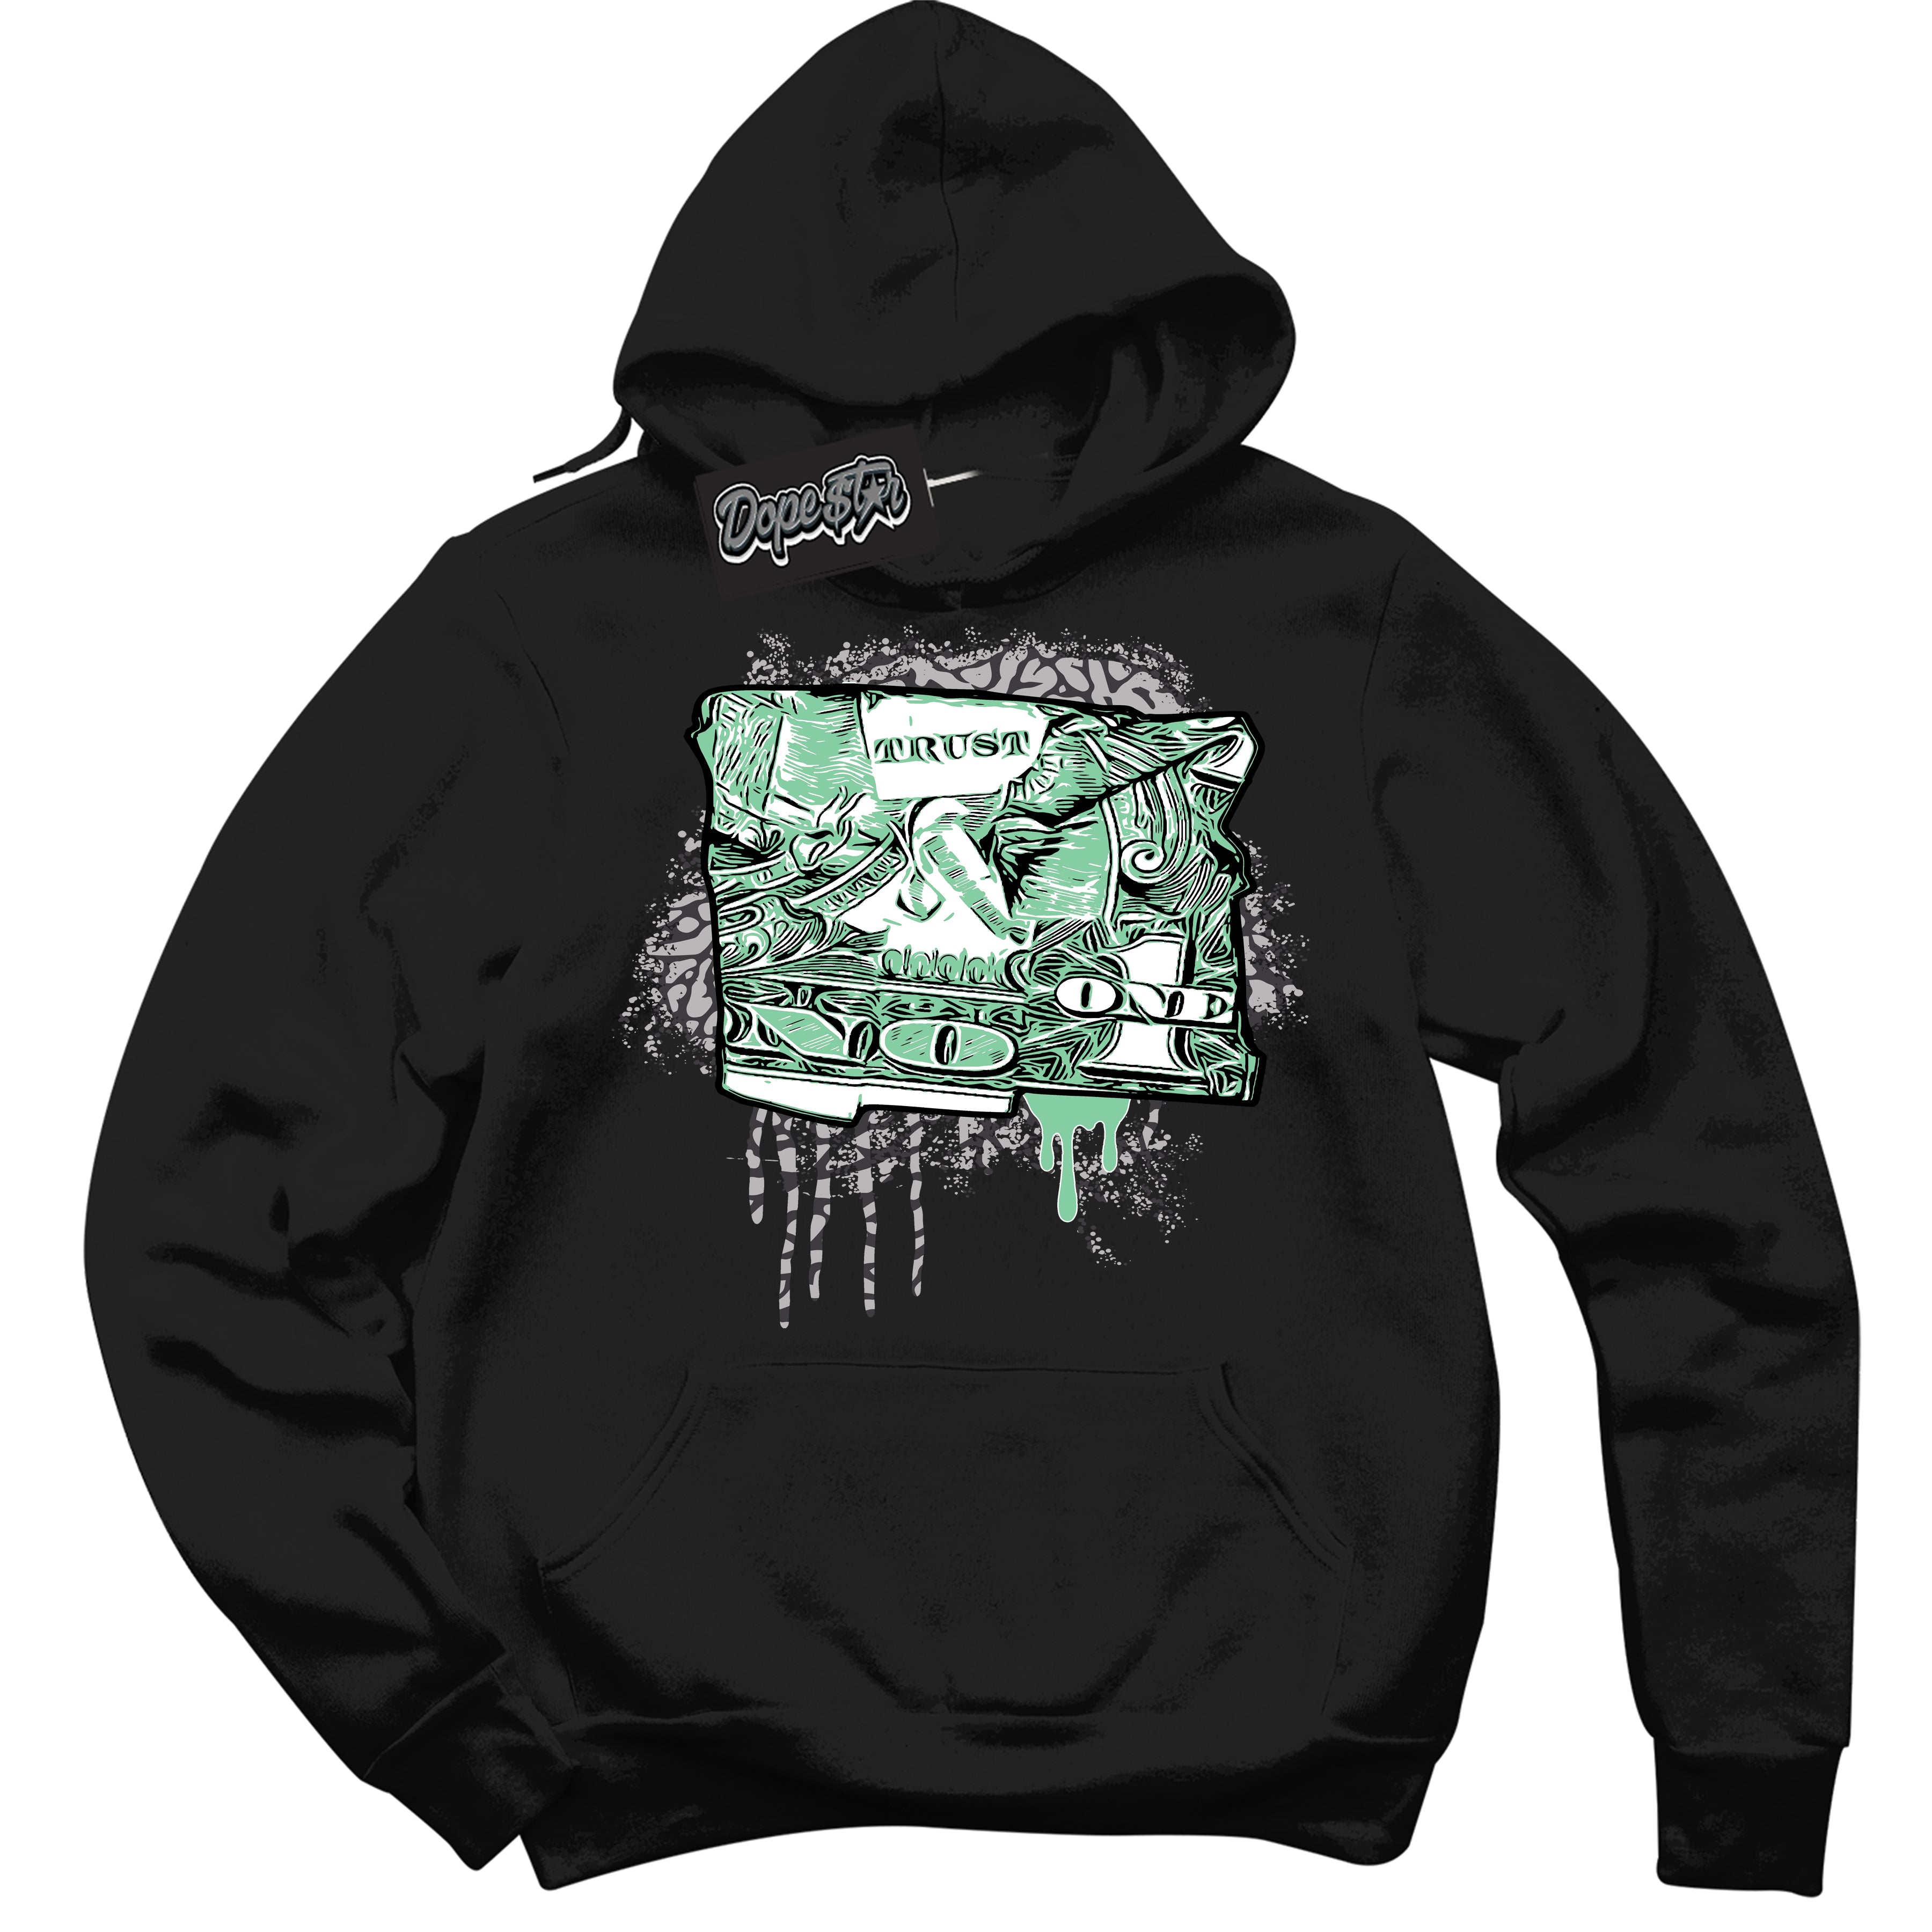 Cool Black Graphic DopeStar Hoodie with “ Trust No One Dollar “ print, that perfectly matches Green Glow 3S sneakers